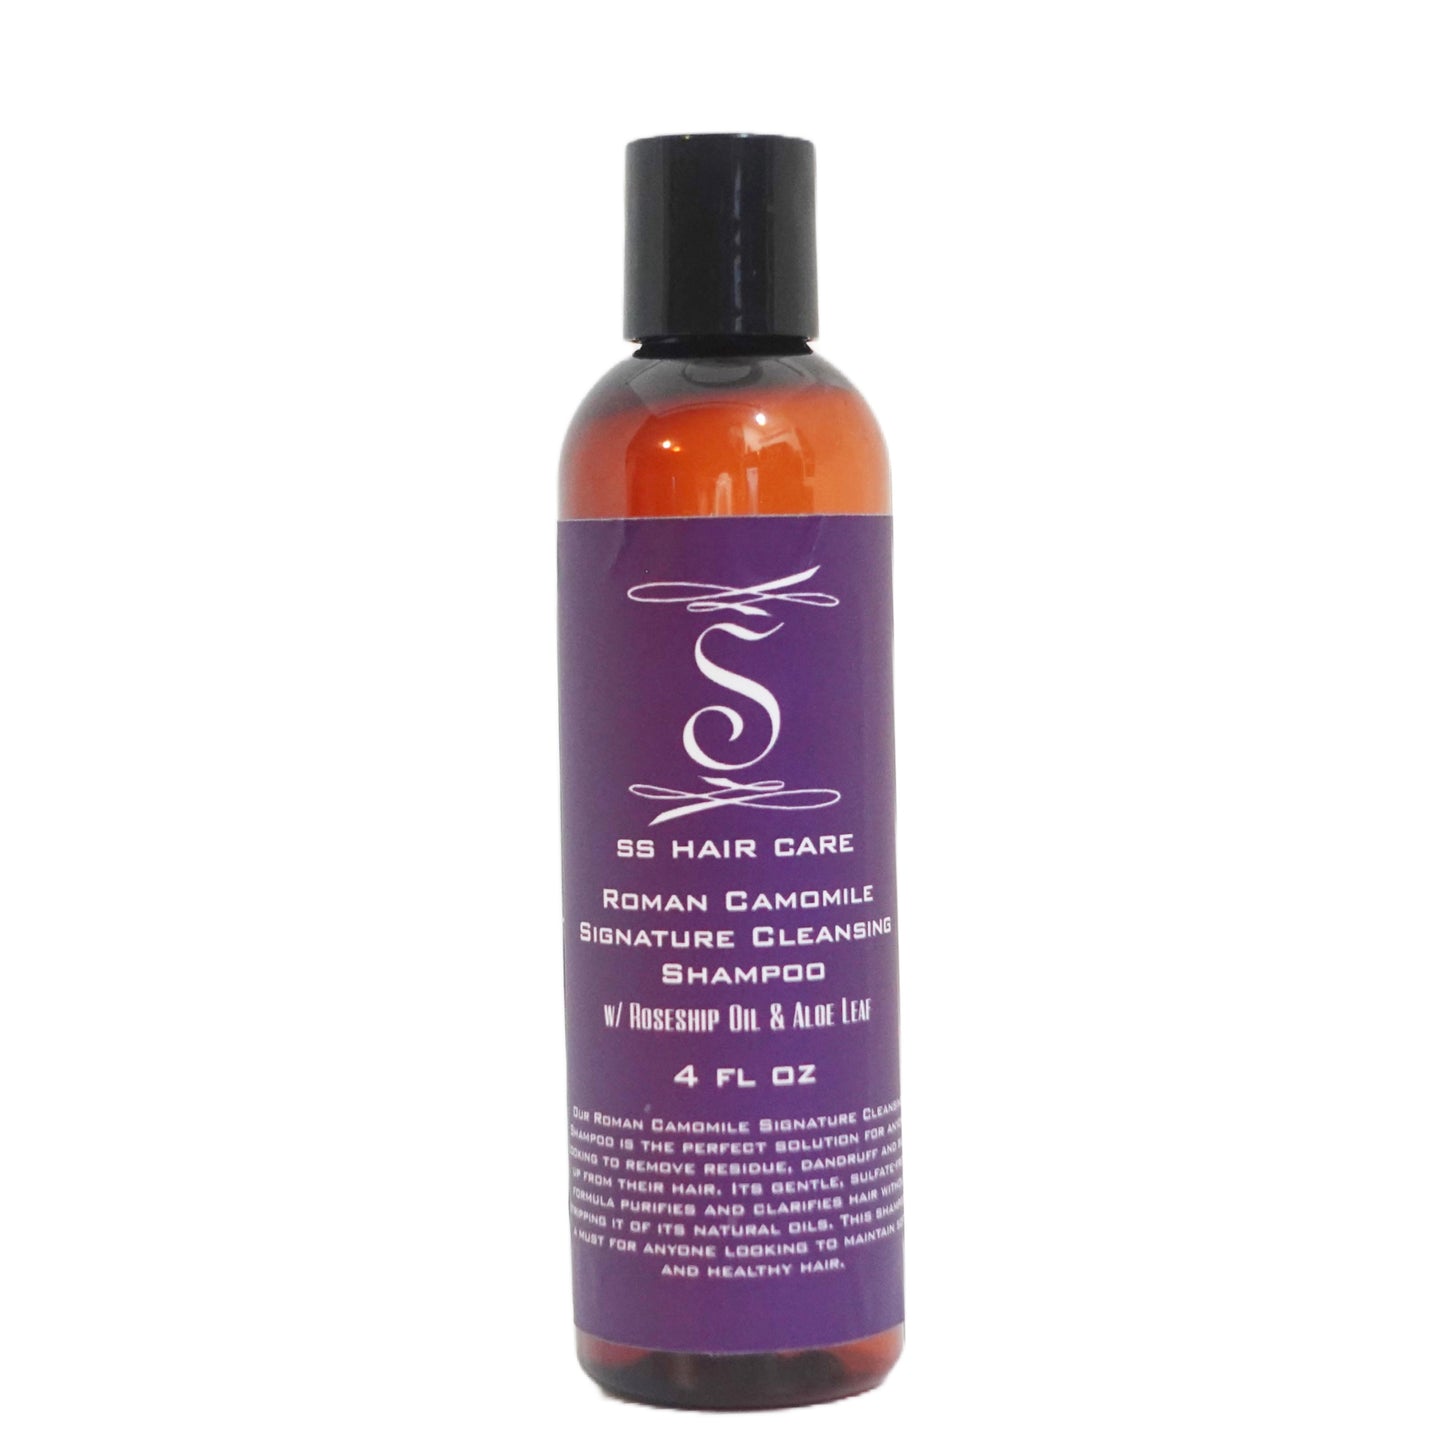 SS Hair Care Roman Camomile Signature Cleansing Shampoo